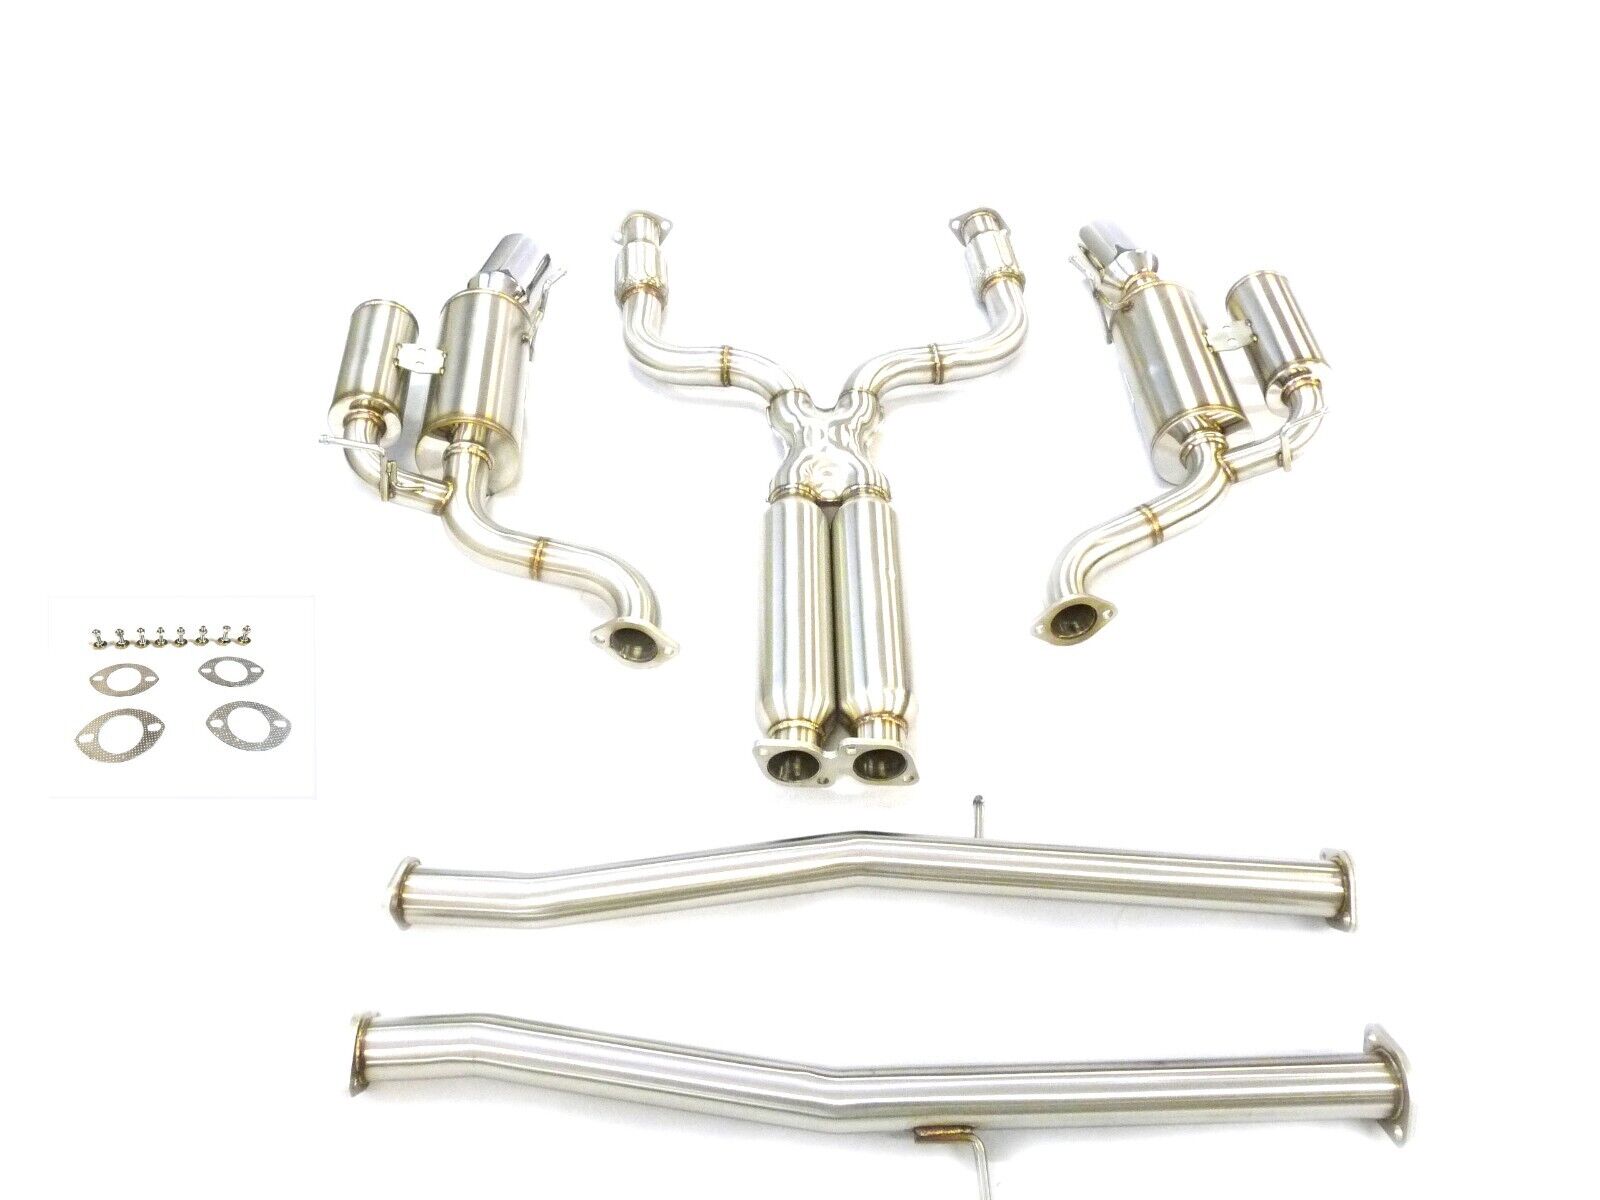 OBX-RS S/S Catback Exhaust Fitment For 08 to 15 G37/G37X/Q60 S 3.7L V6 4Dr.